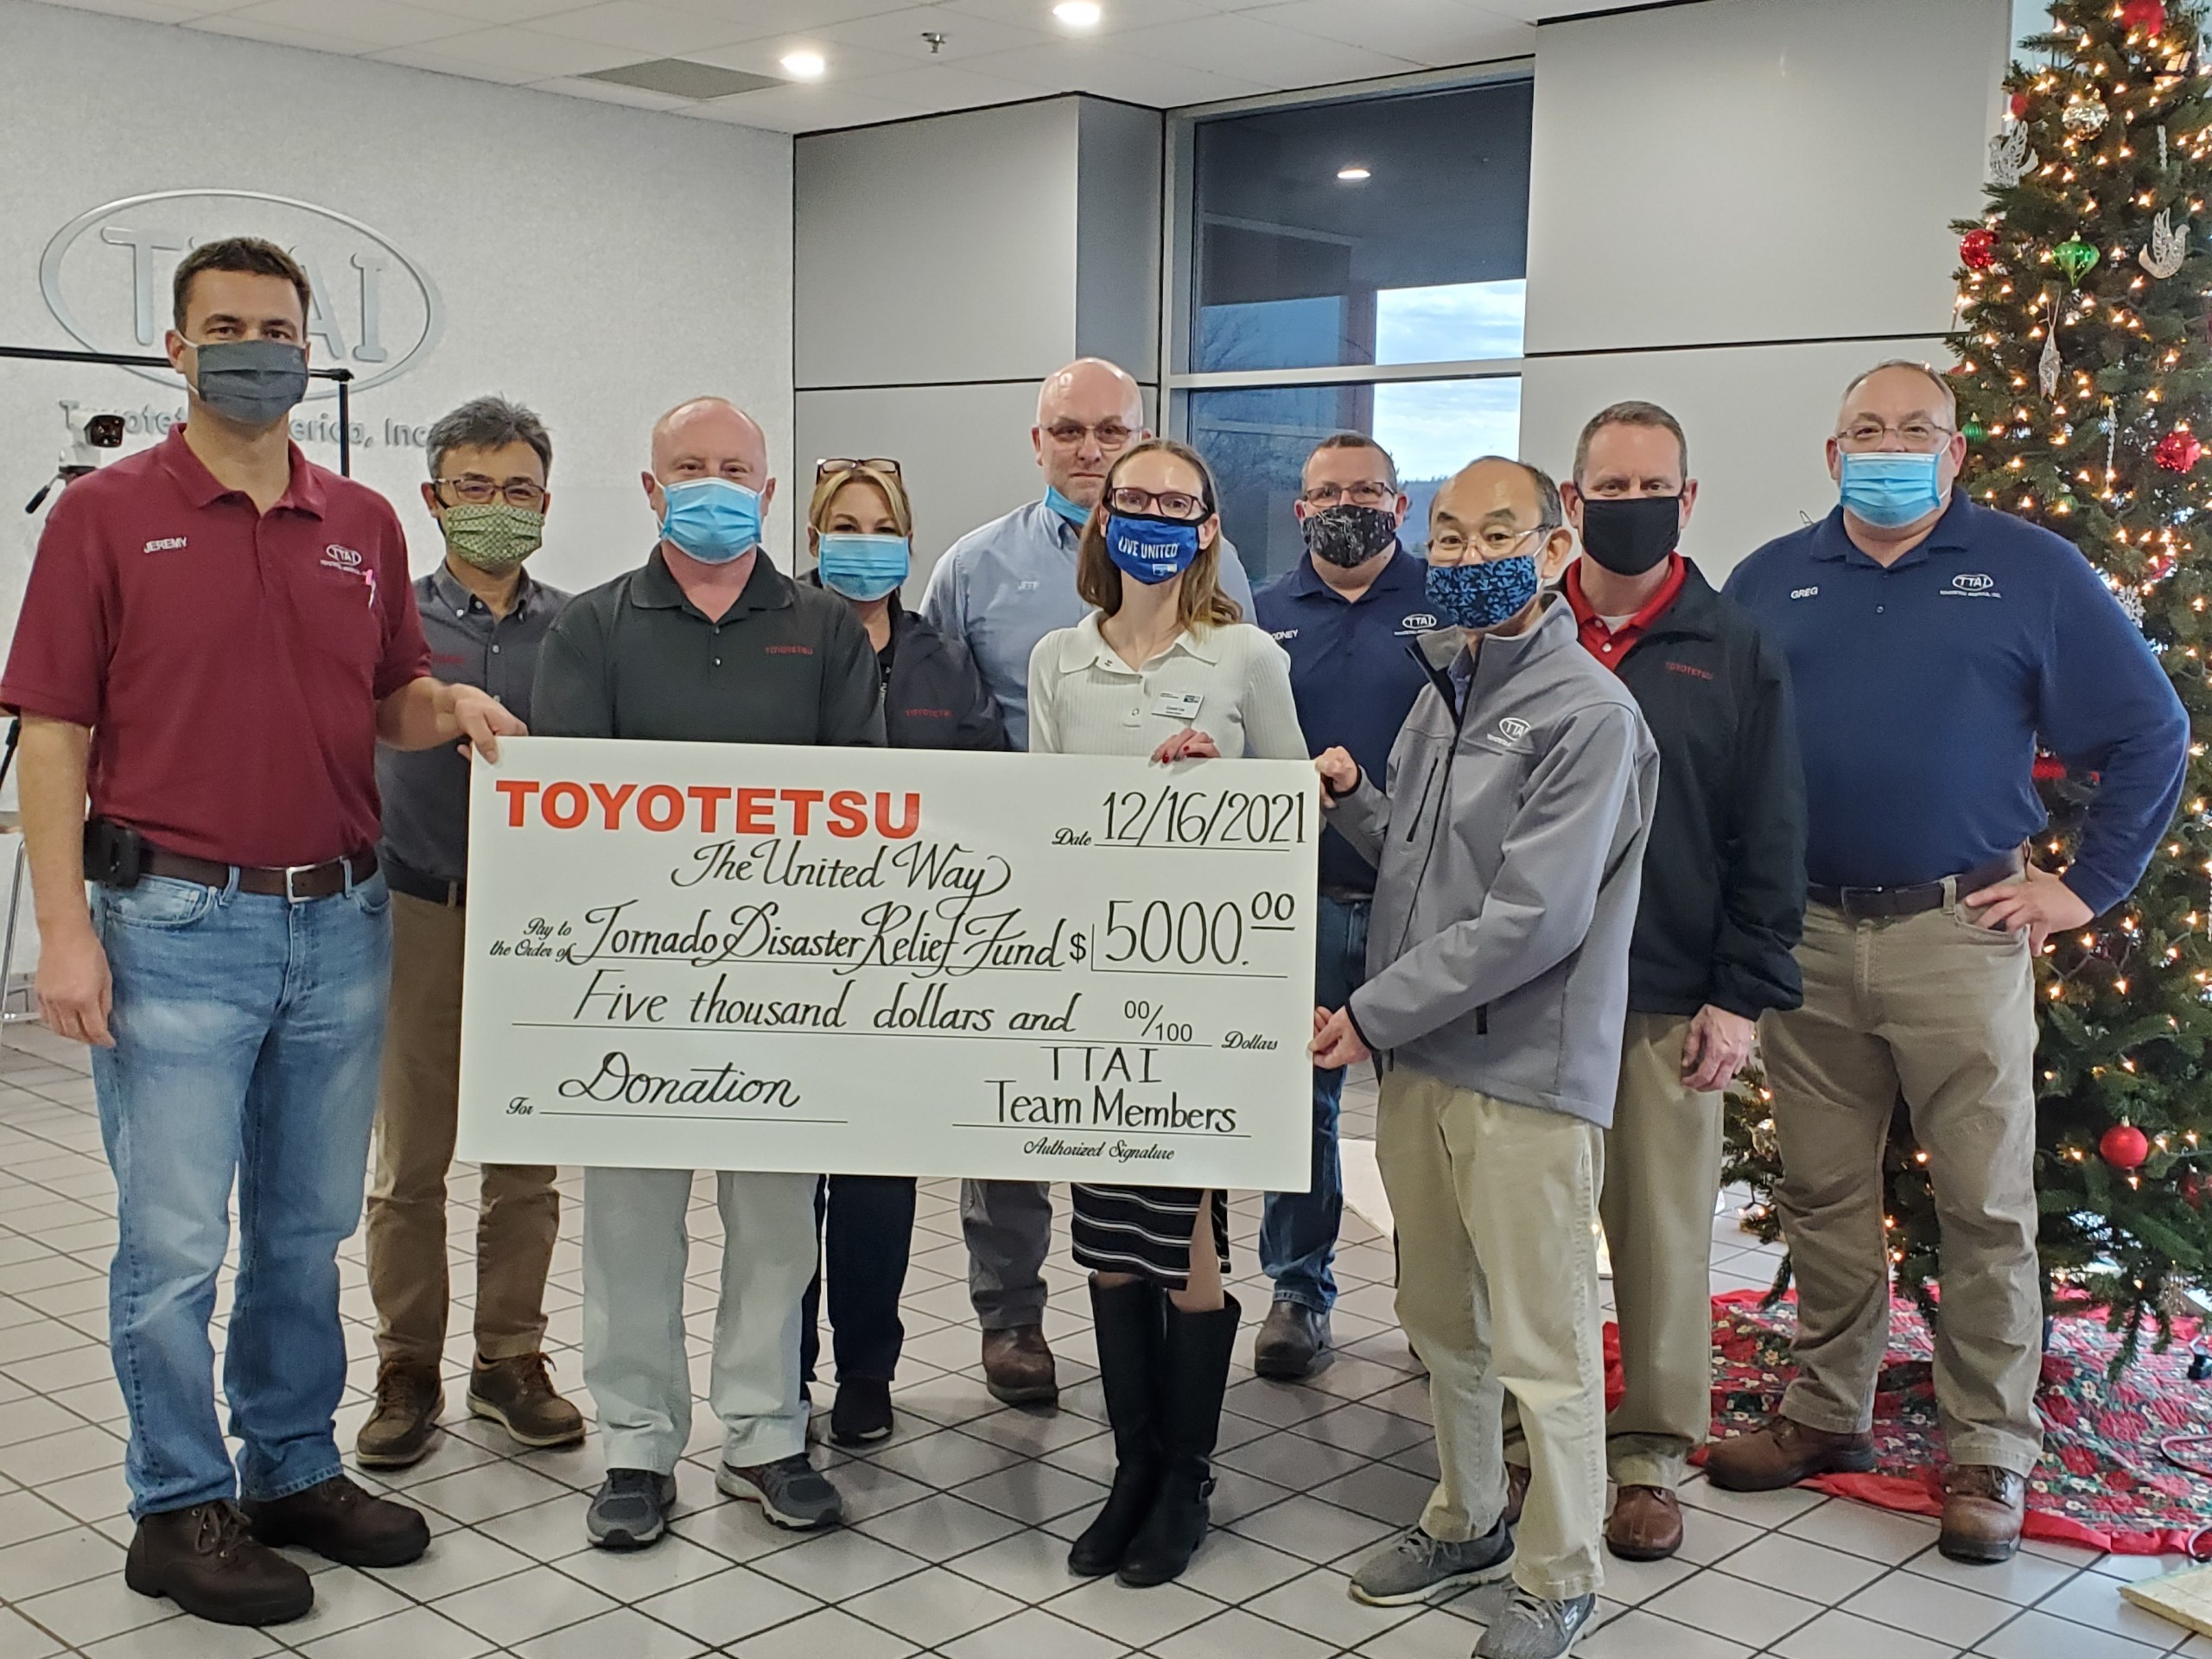 Group photo of Toyotetsu staff and Crystal with large check.